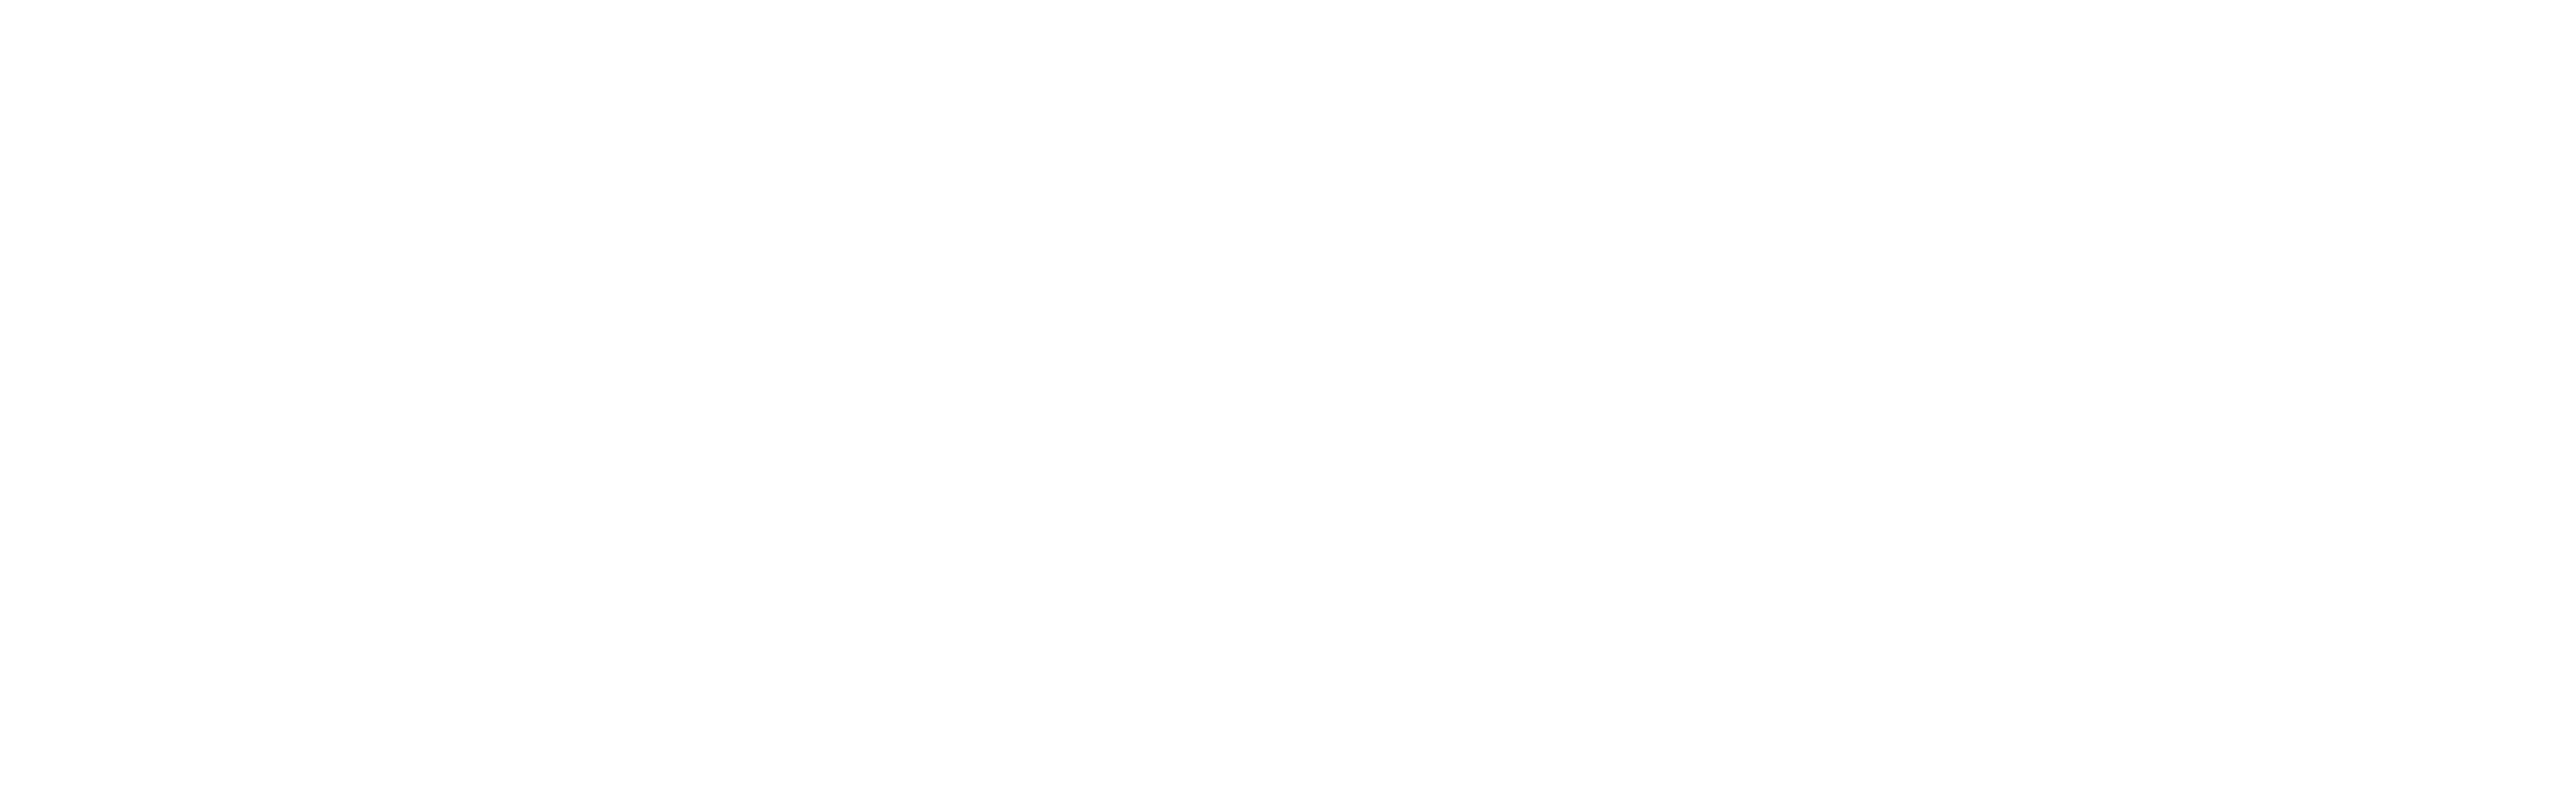 That band from Finland